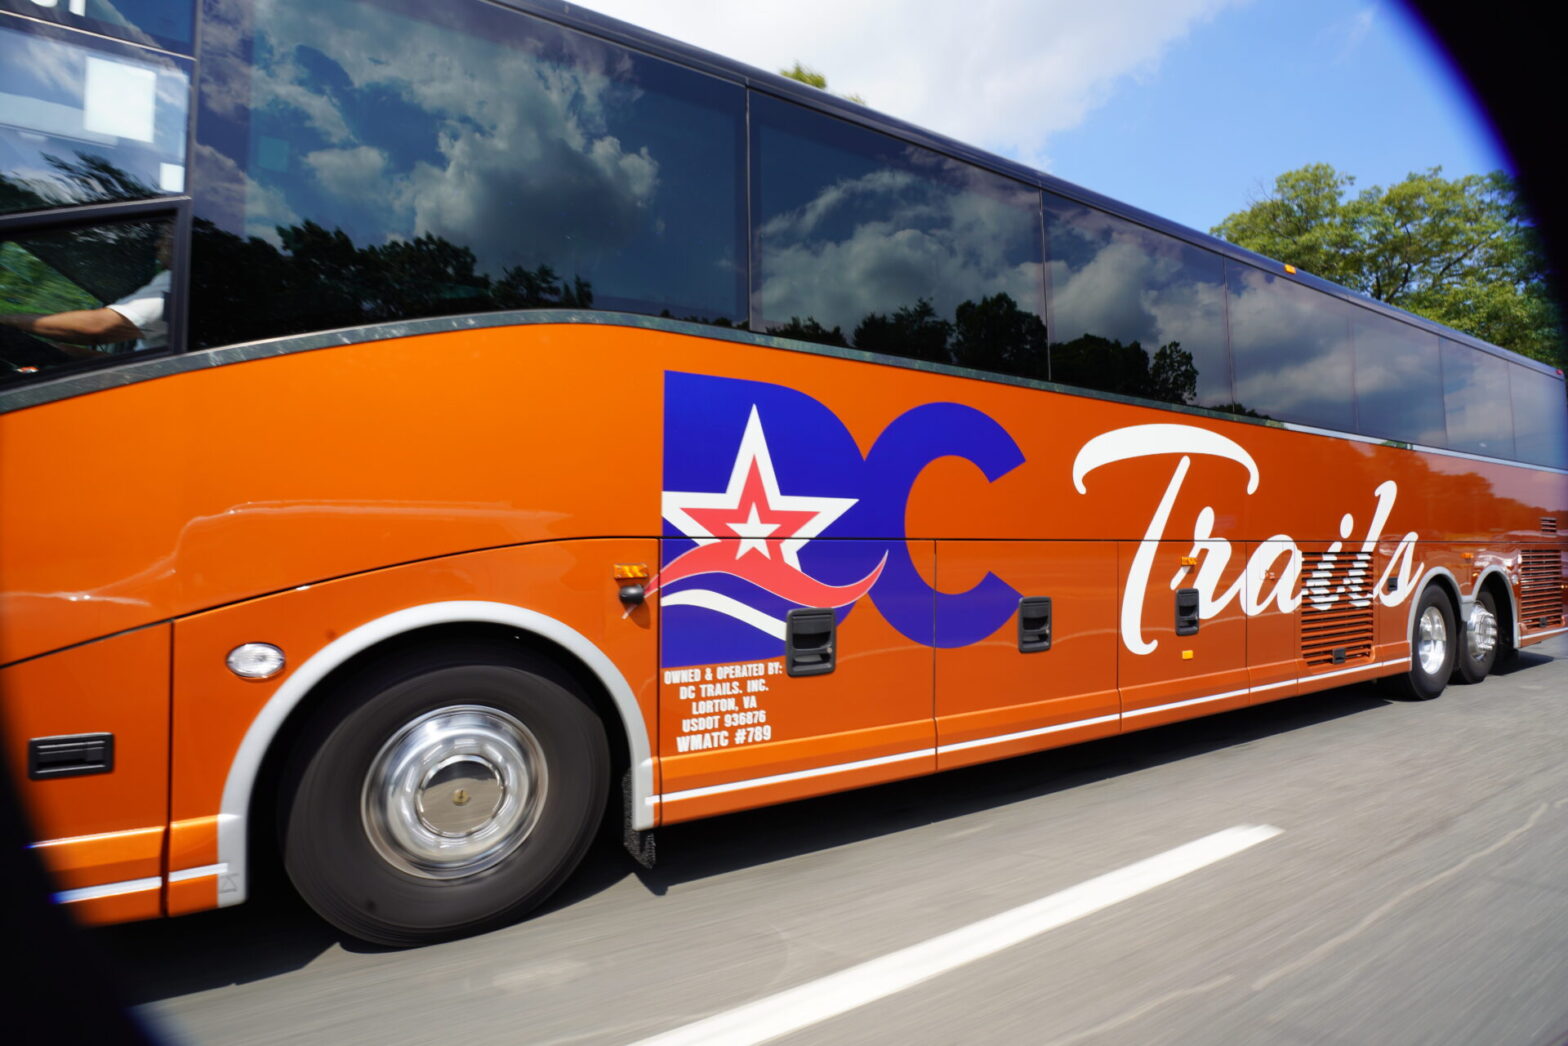 Tips for Planning a Holiday Trip to DC by Bus